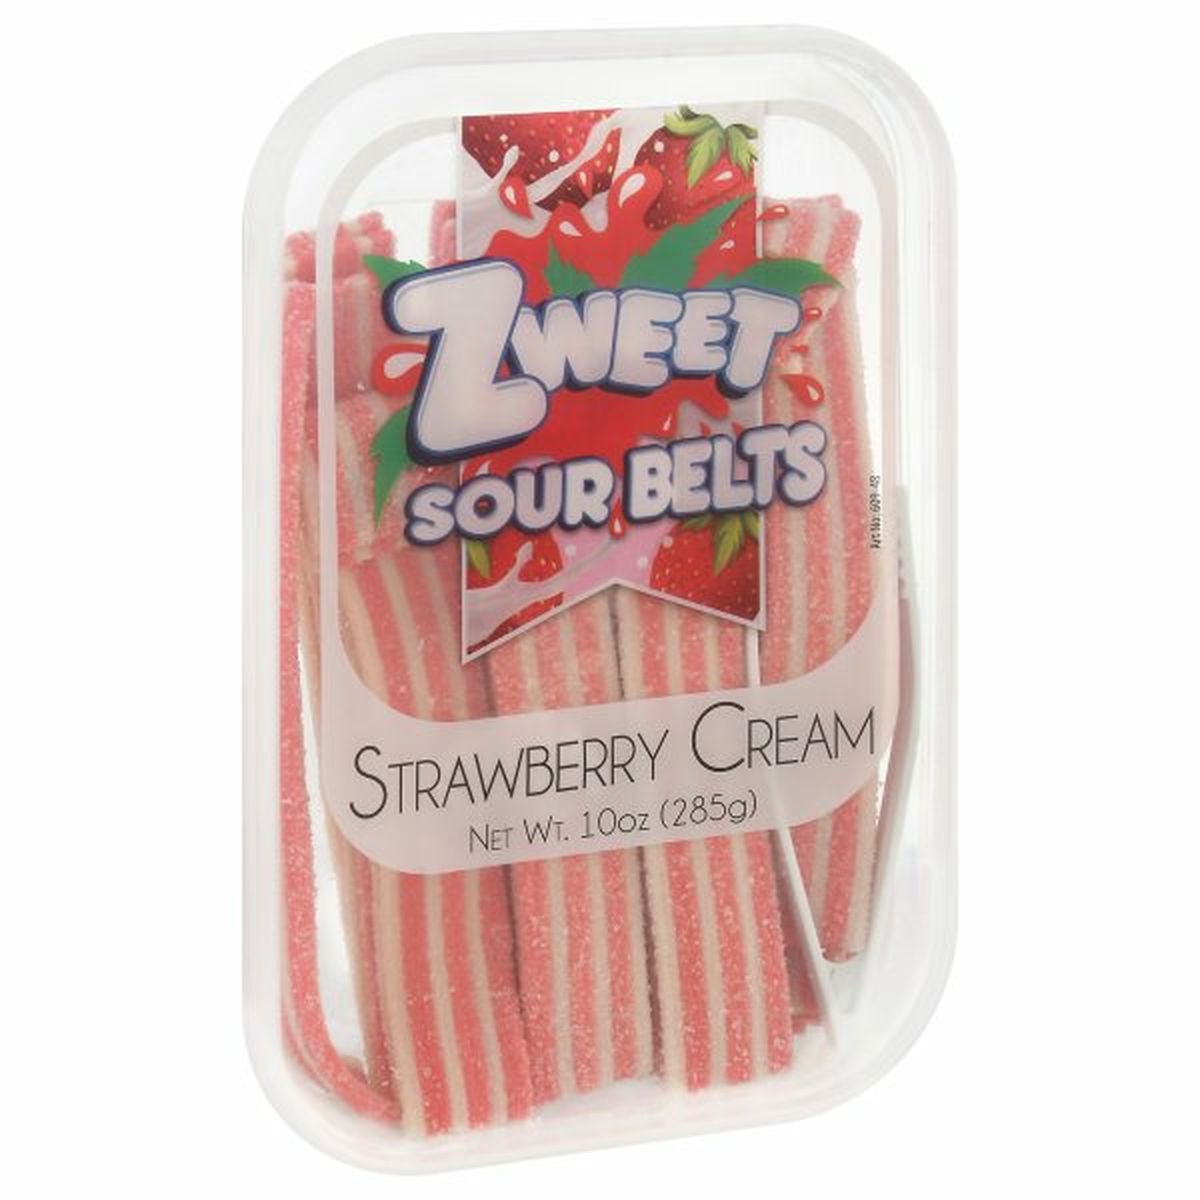 Calories in Zweet Sour Belts, Strawberry Cream